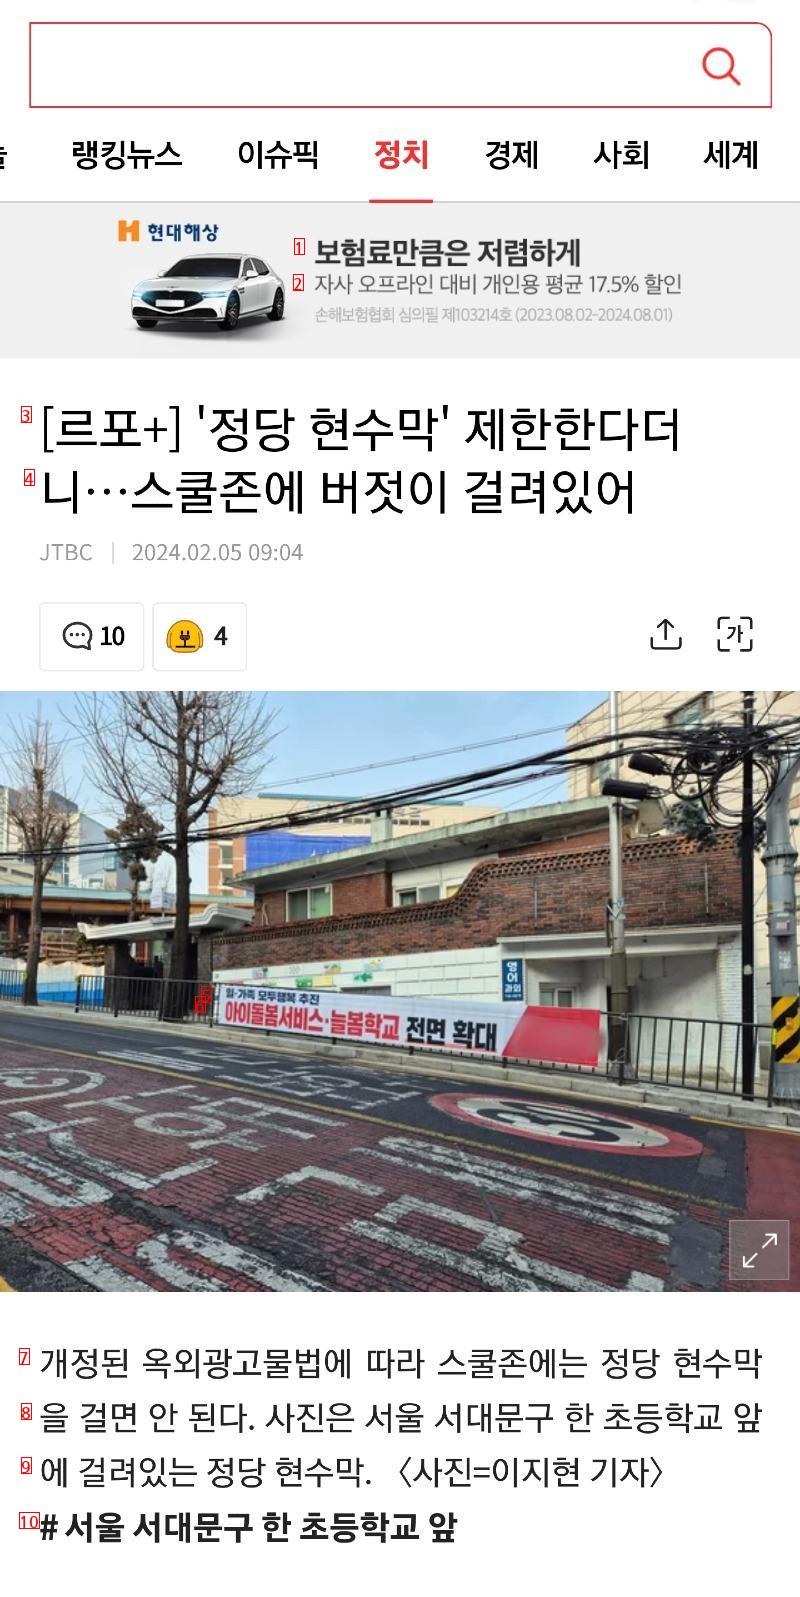 Byung-shin's luggage hanging a banner in the school zone